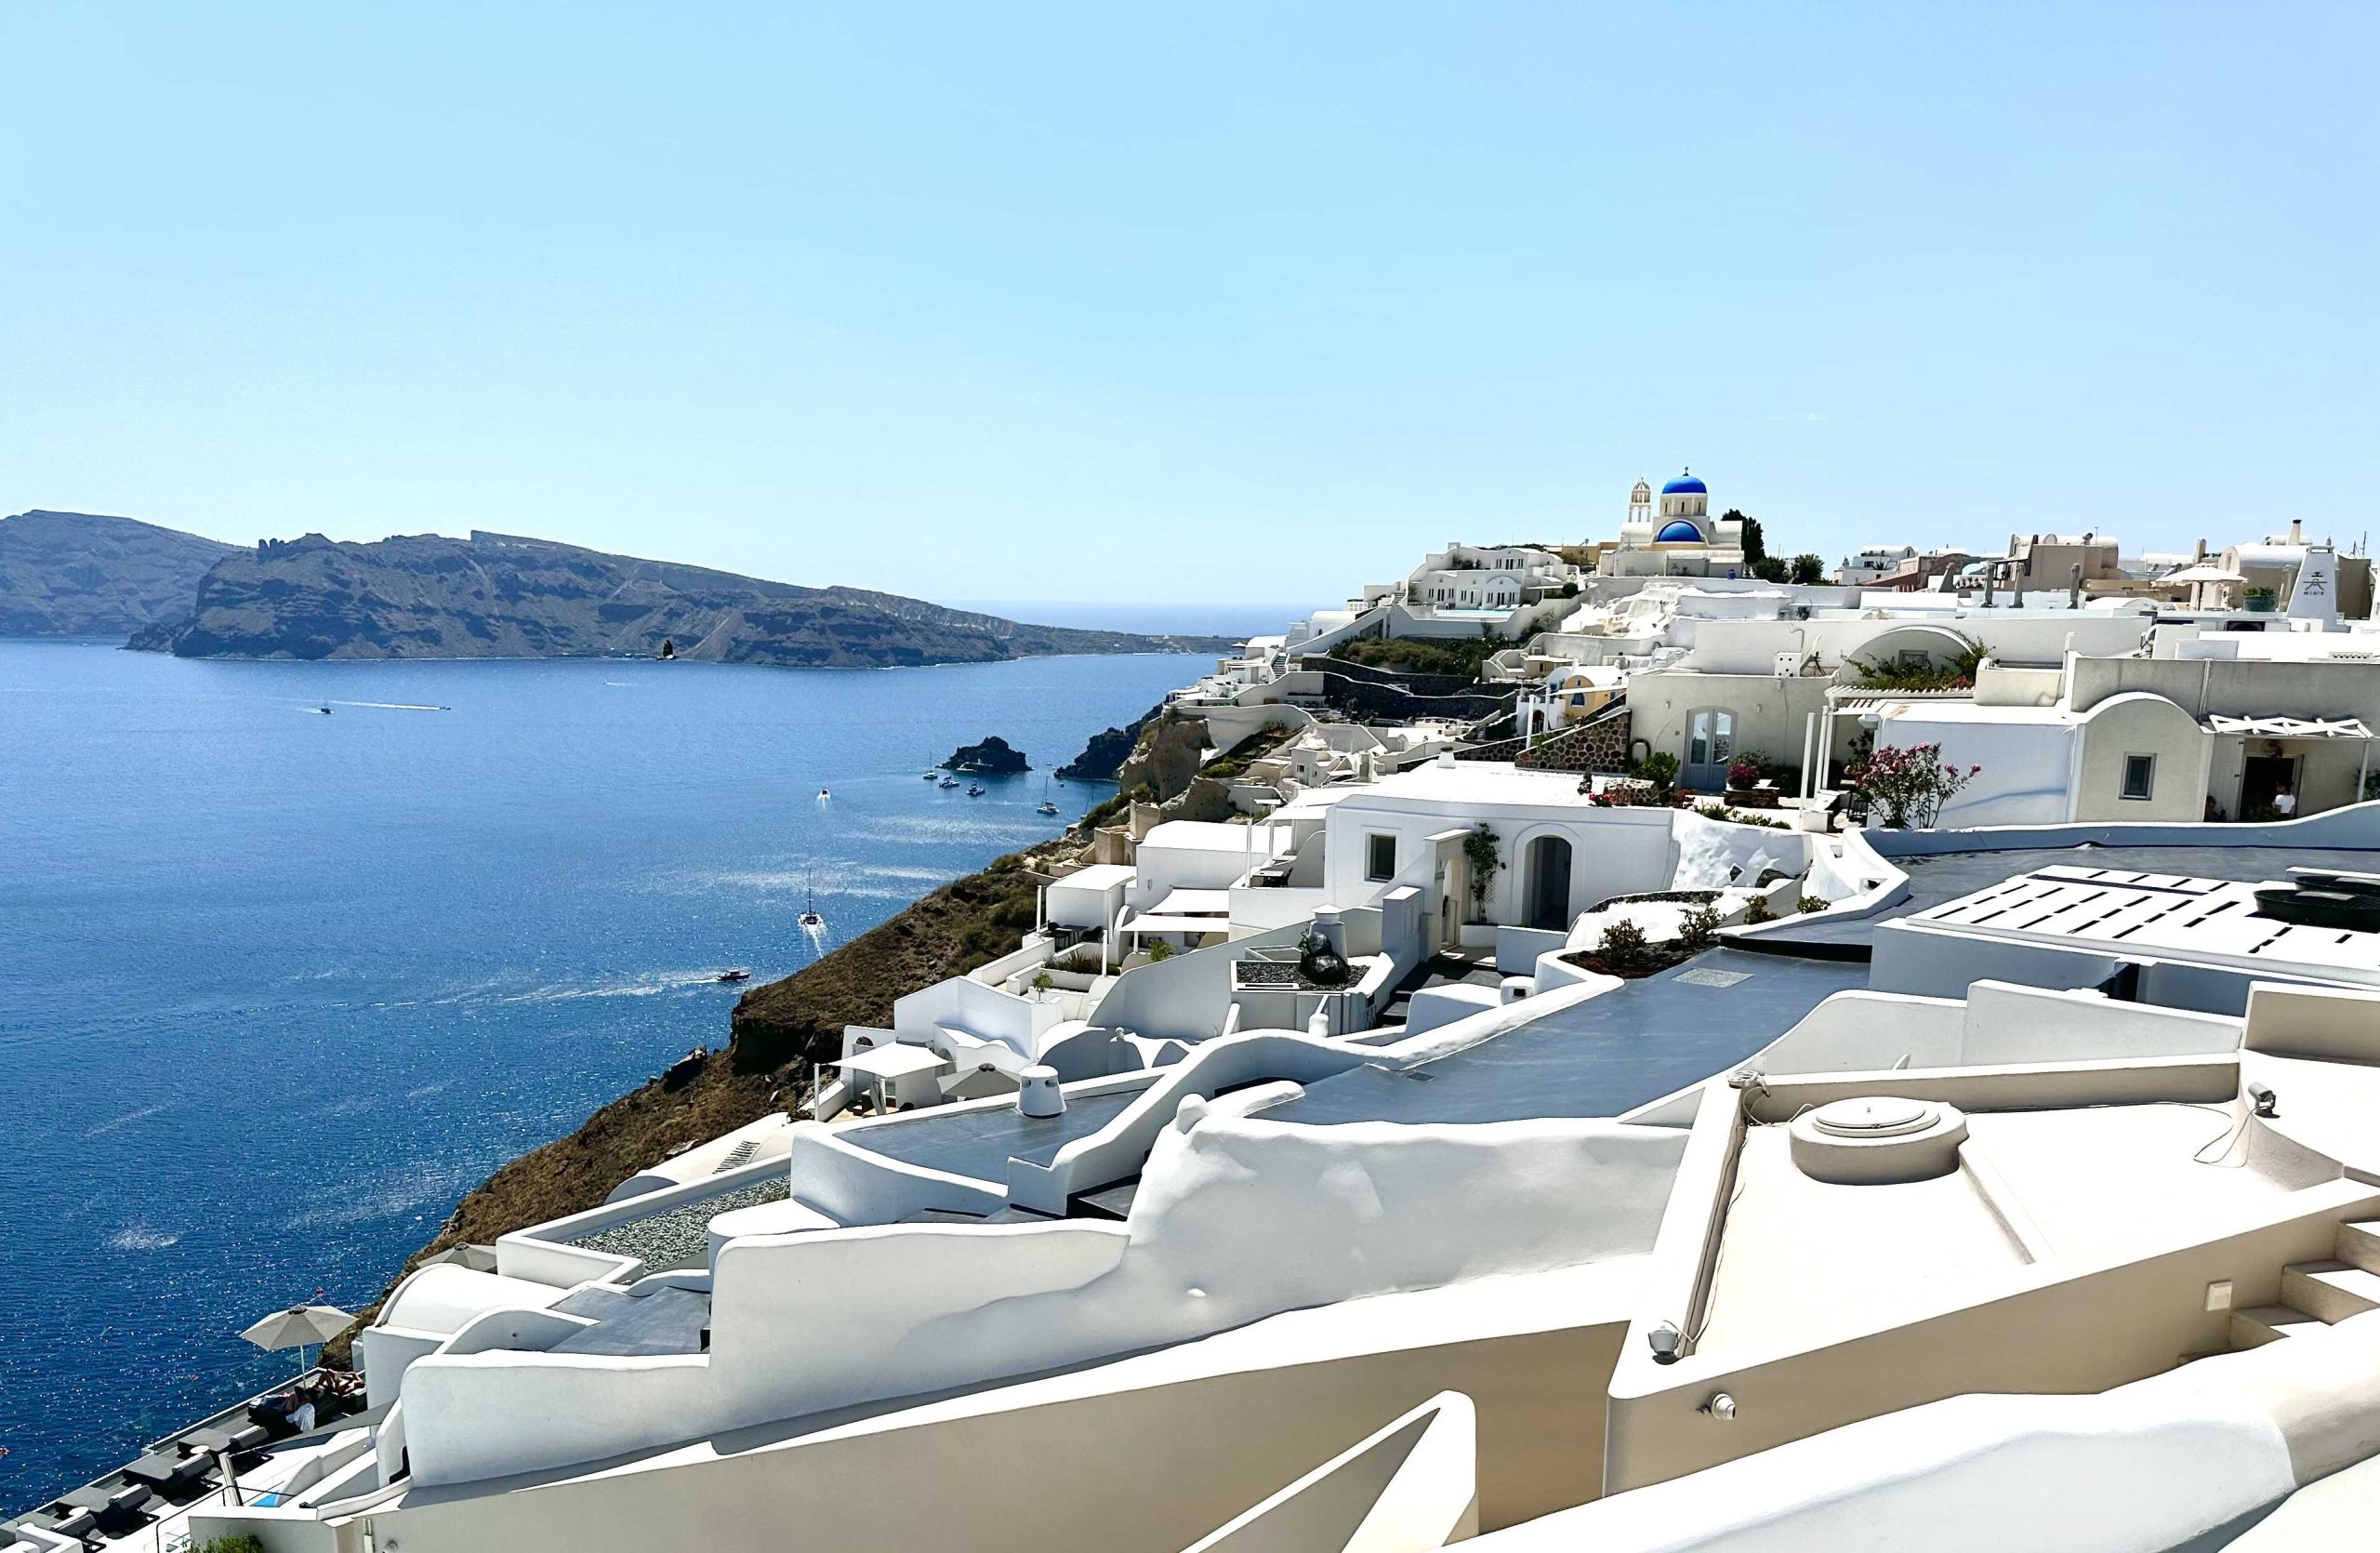 Santorini, discover its rich in history and awe inspiring landscapes.